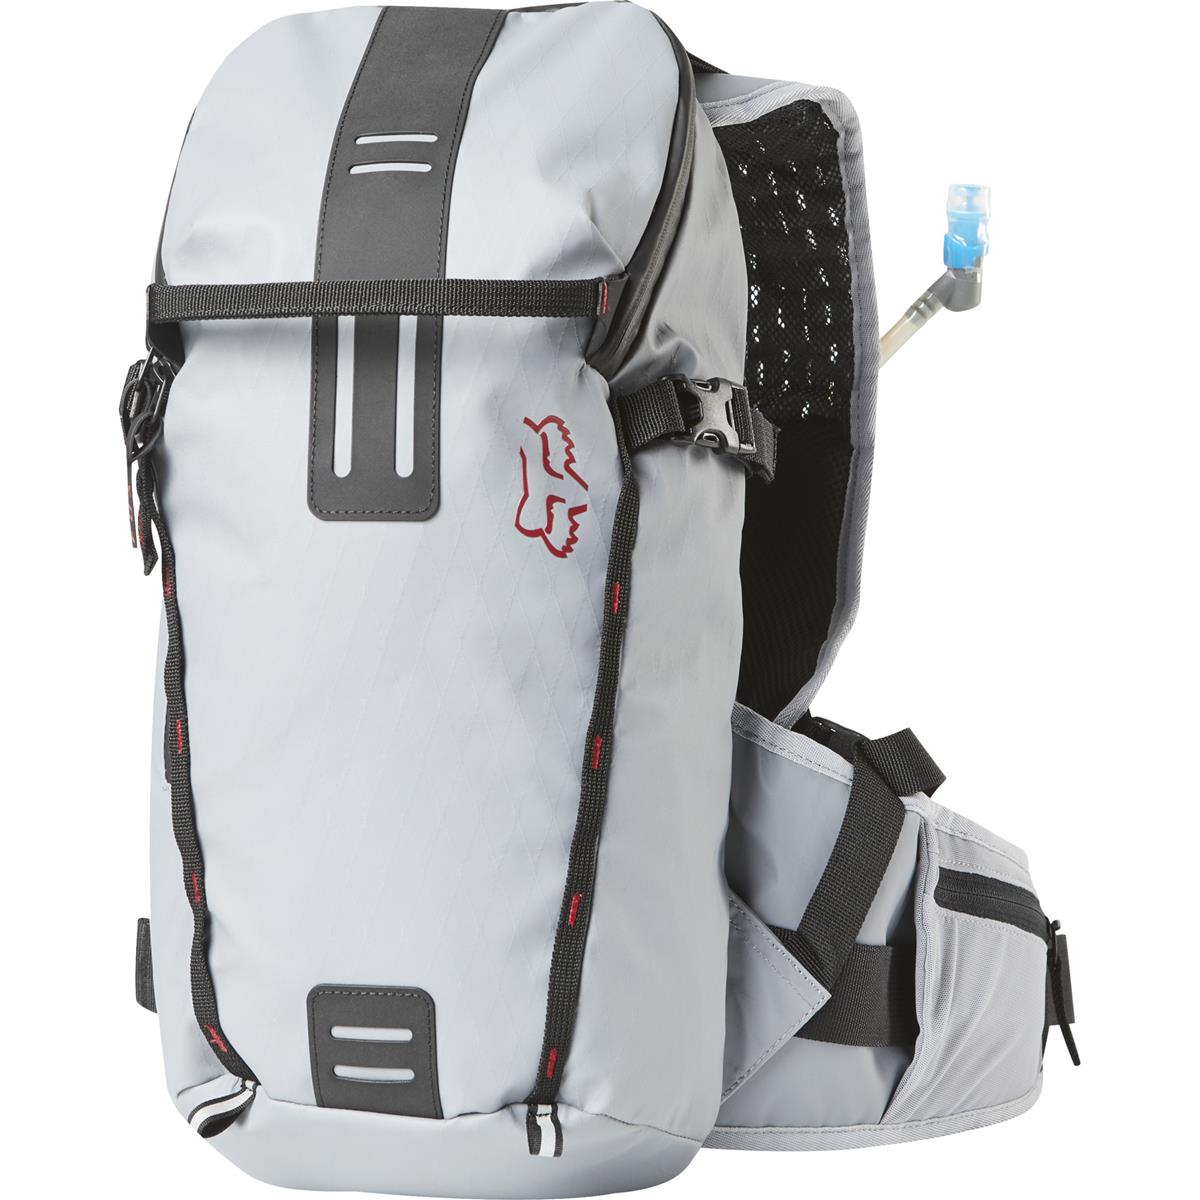 Fox Backpack with Hydration System Compartment Utility Hydration 11.6 L, Steel Gray